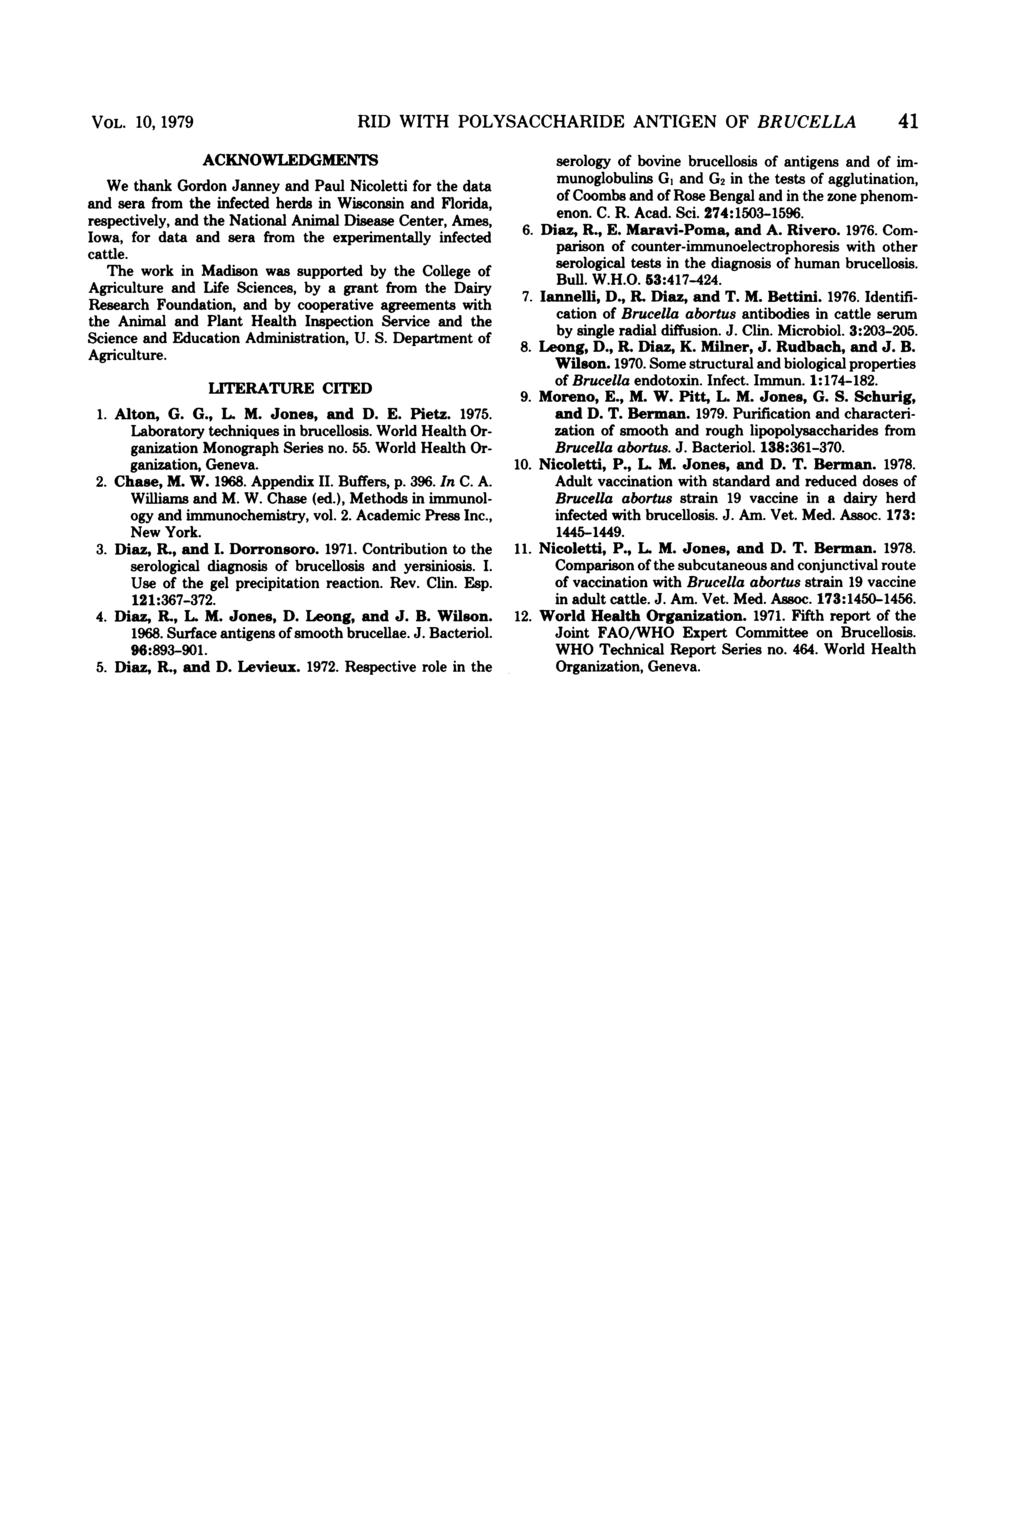 VOL. 10, 1979 RID WITH POLYSACCHARIDE ANTIGEN OF BRUCELLA 41 ACKNOWLEDGMENTS We thank Gordon Janney and Paul Nicoletti for the data and sera from the infected herds in Wisconsin and Florida,